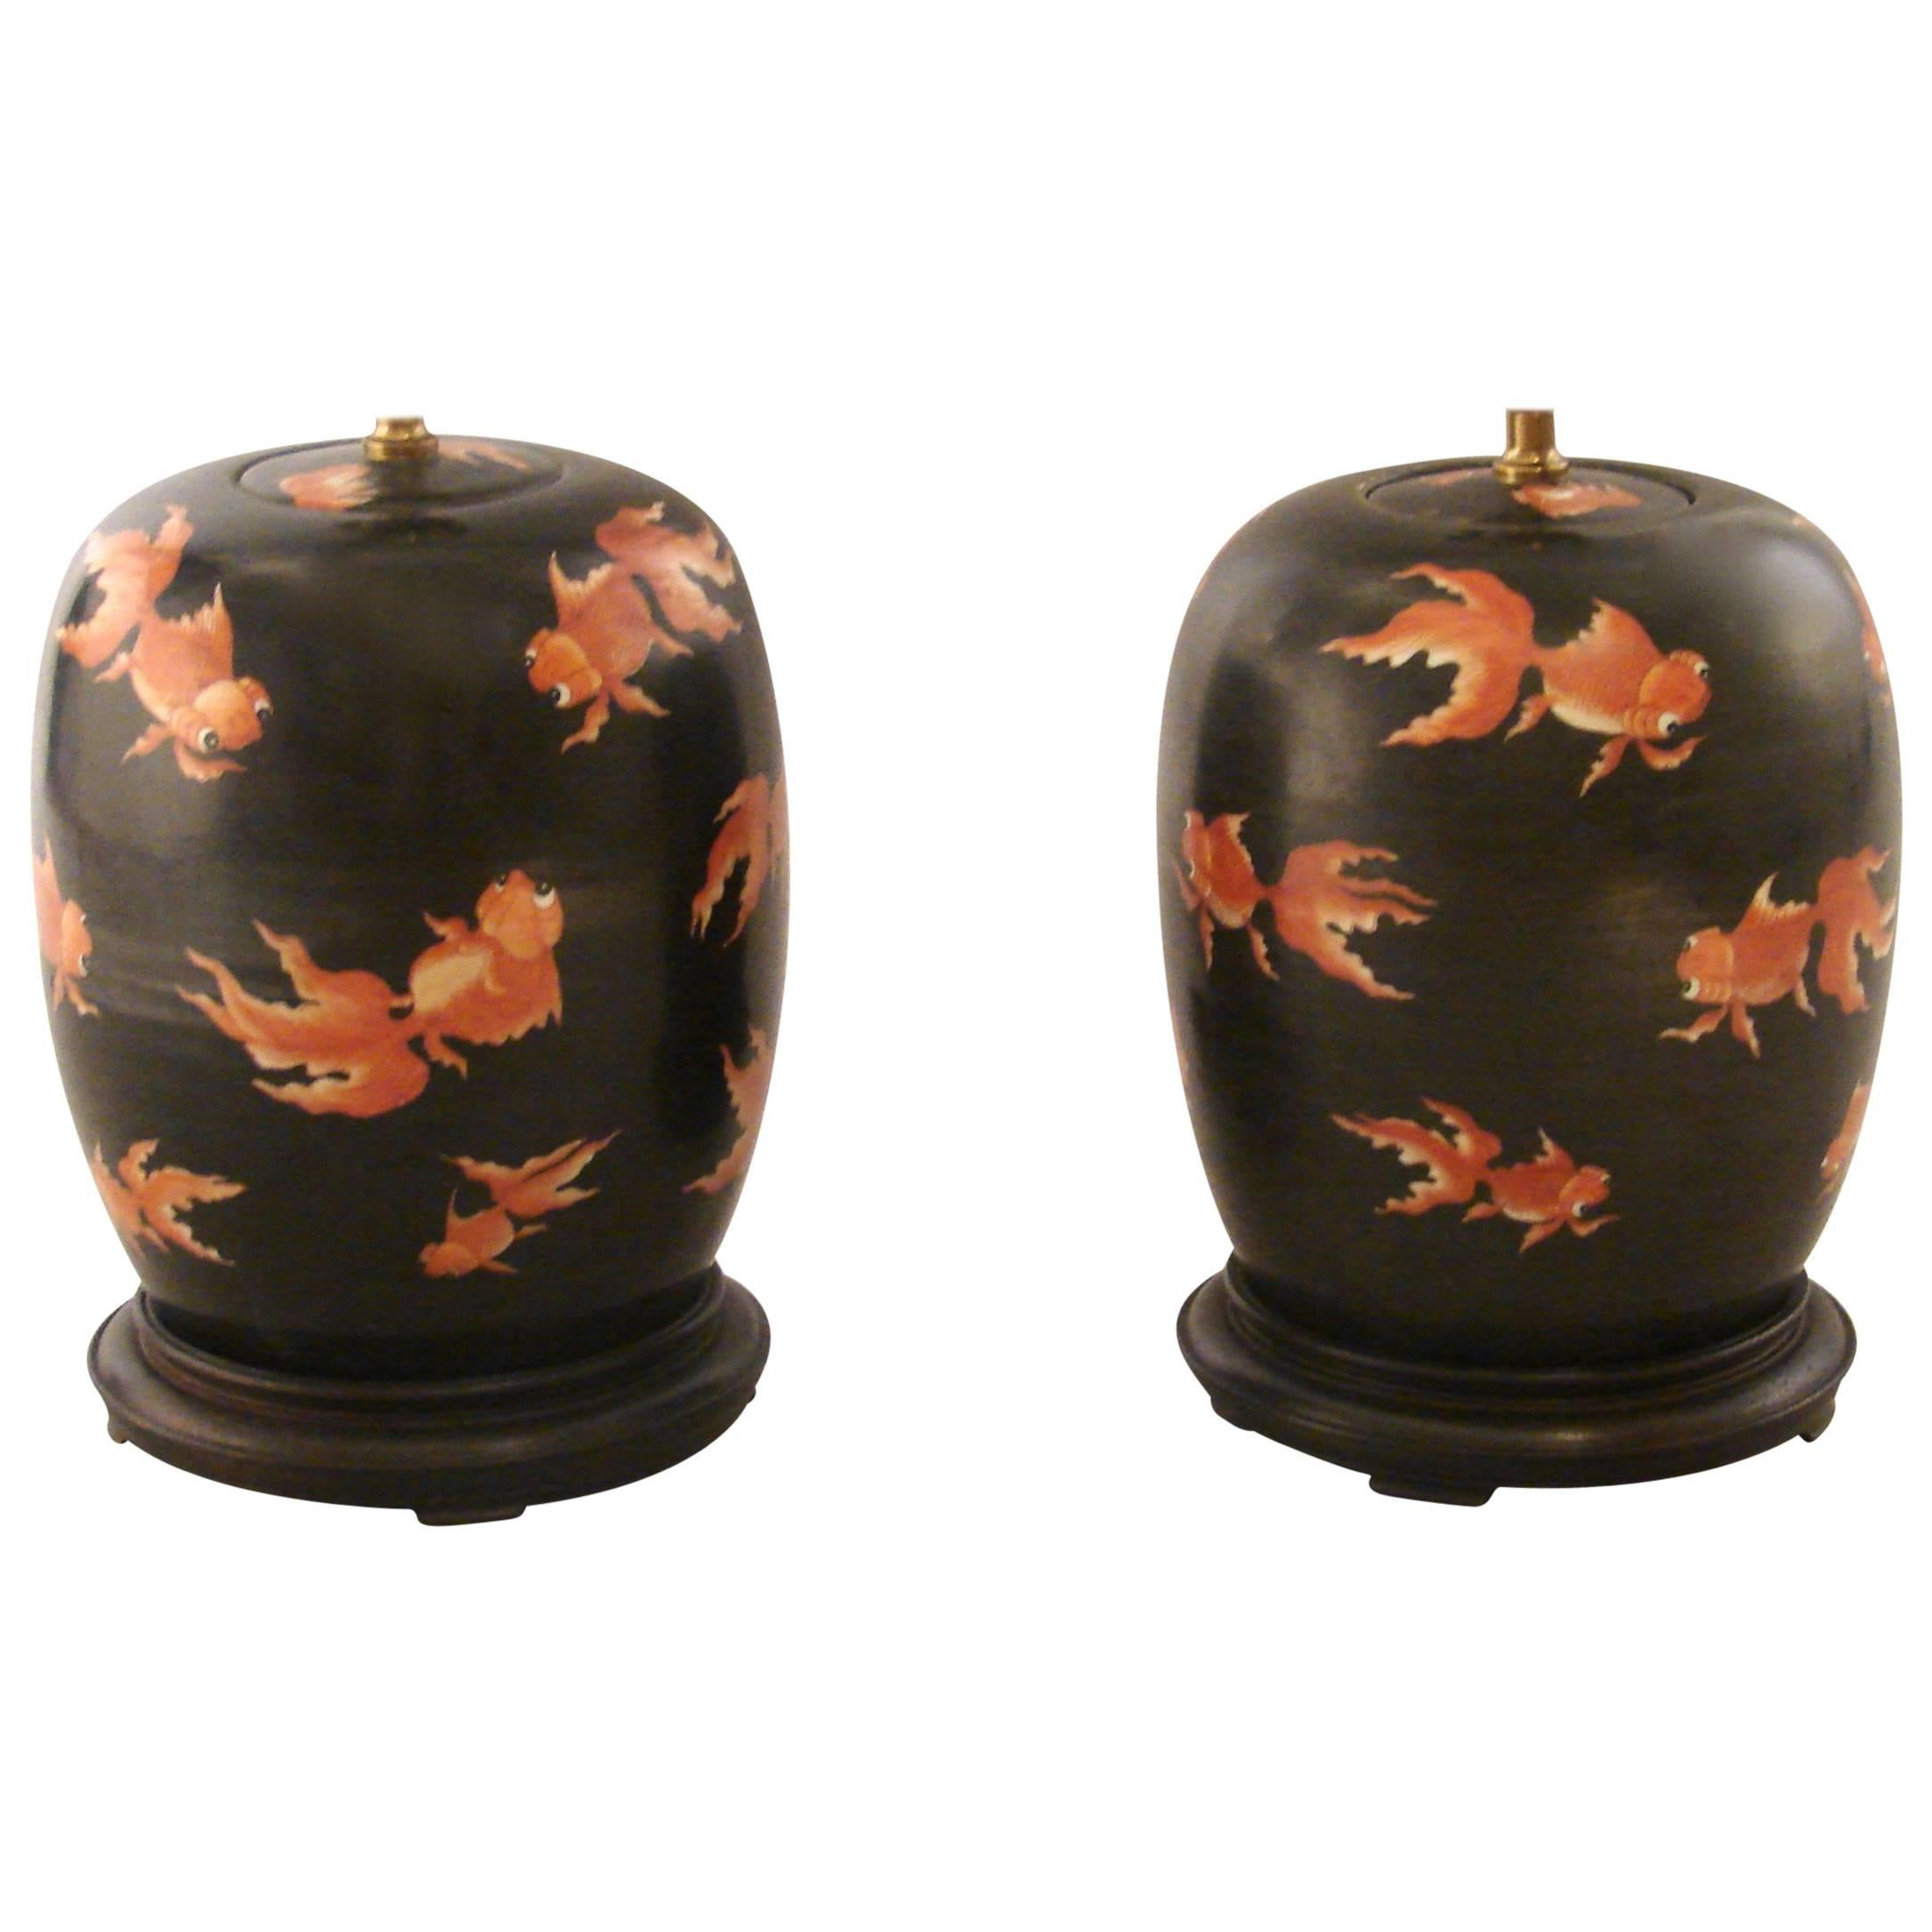 Pair of Chinese Coi Decorated Ginger Jars Now as Lamps